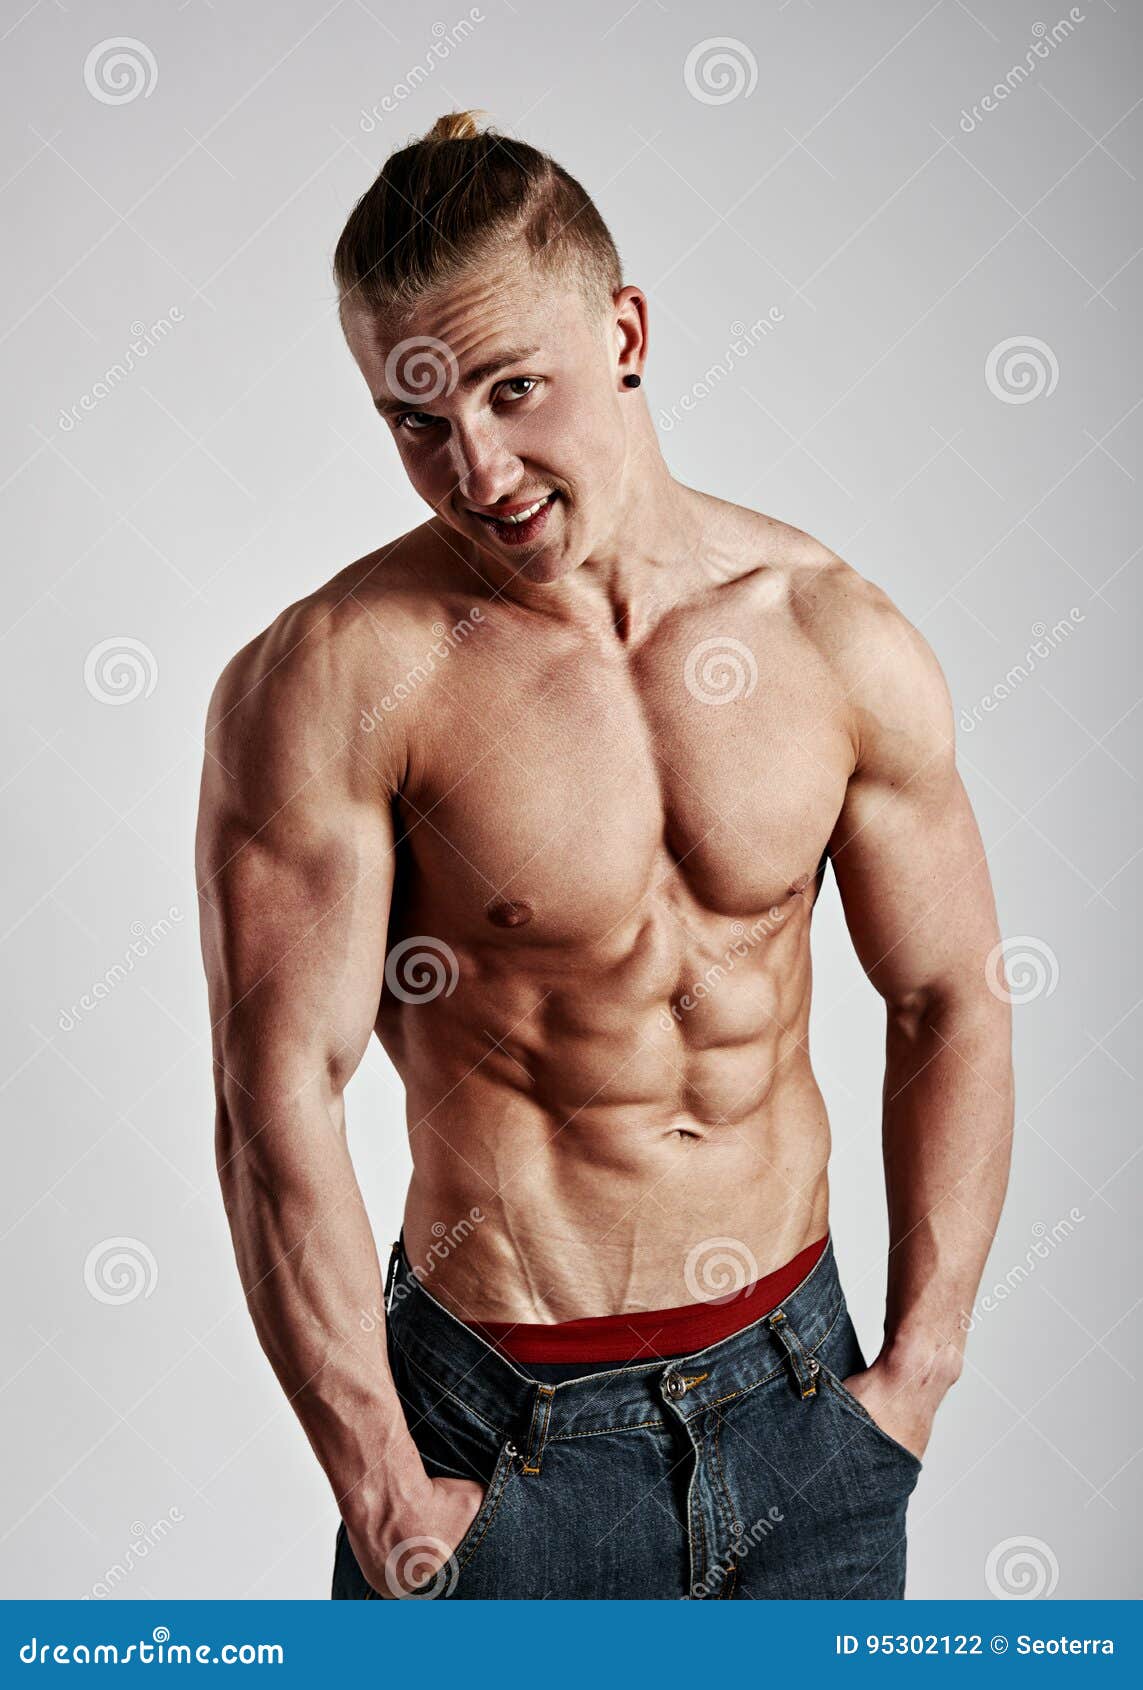 Angry Bodybuilder Naked Torso Stock Photo (Edit Now 